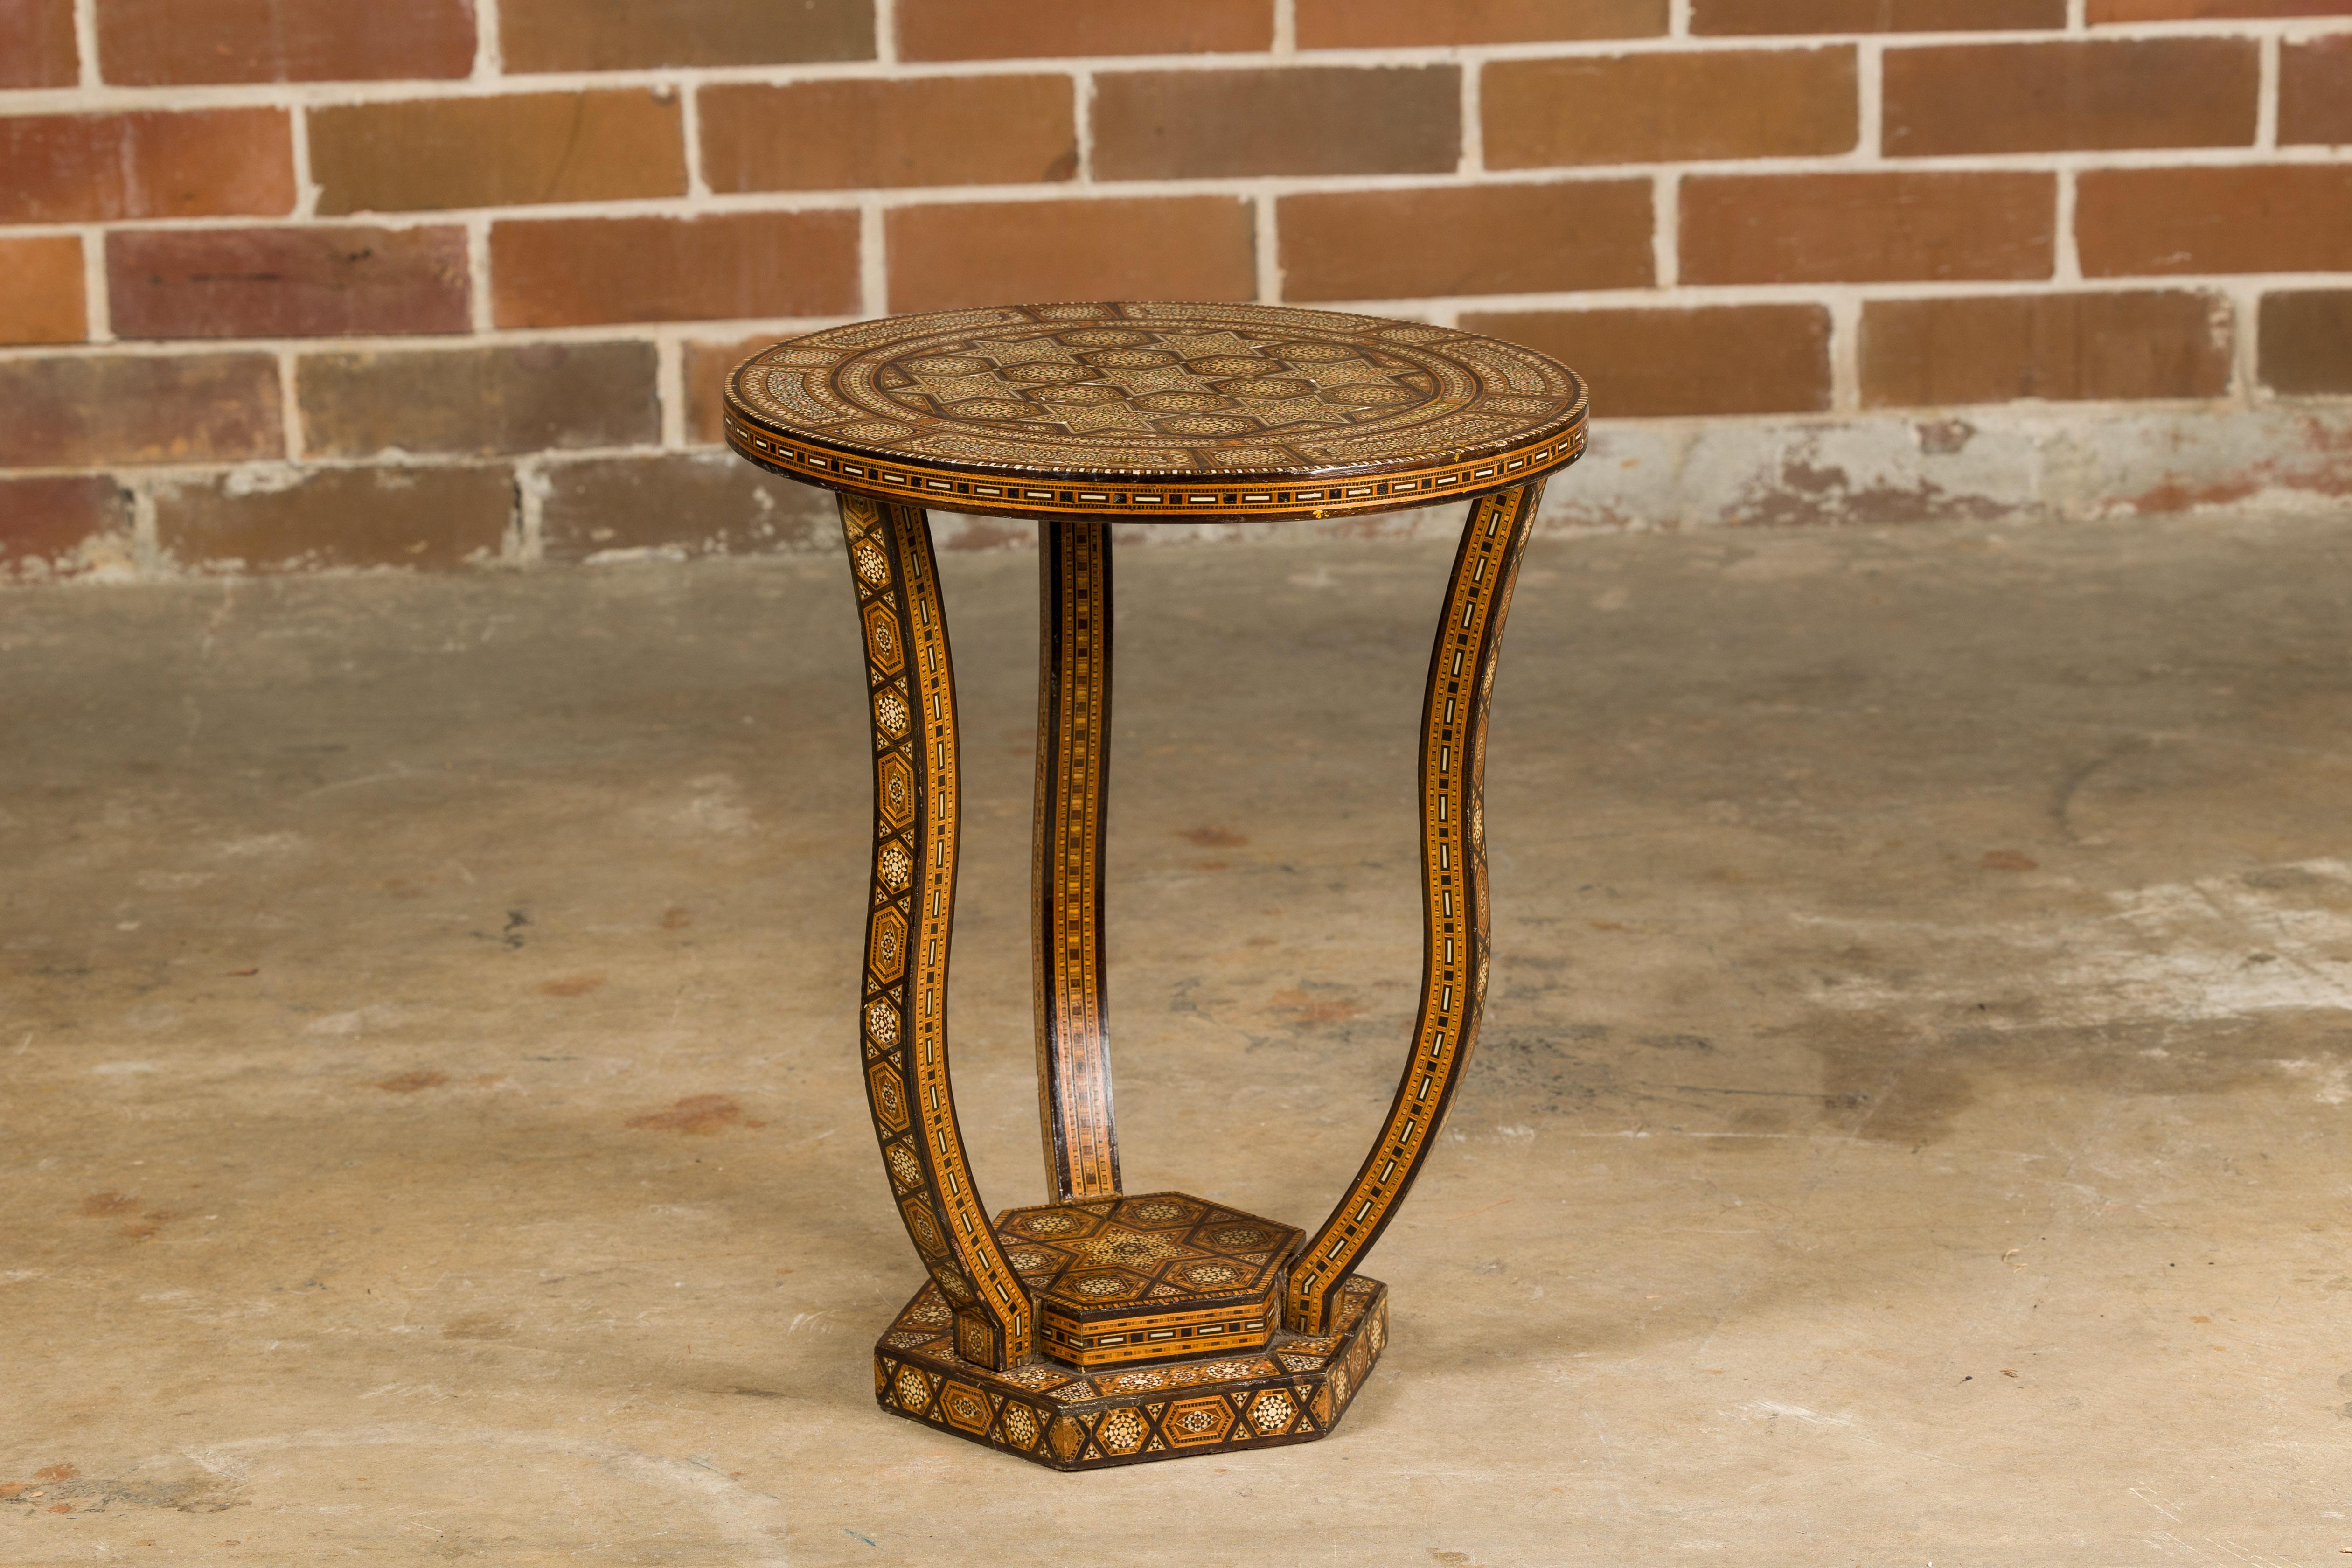 Moroccan 1900s Moorish Style Table with Geometric Bone Inlay and Curving Legs For Sale 2